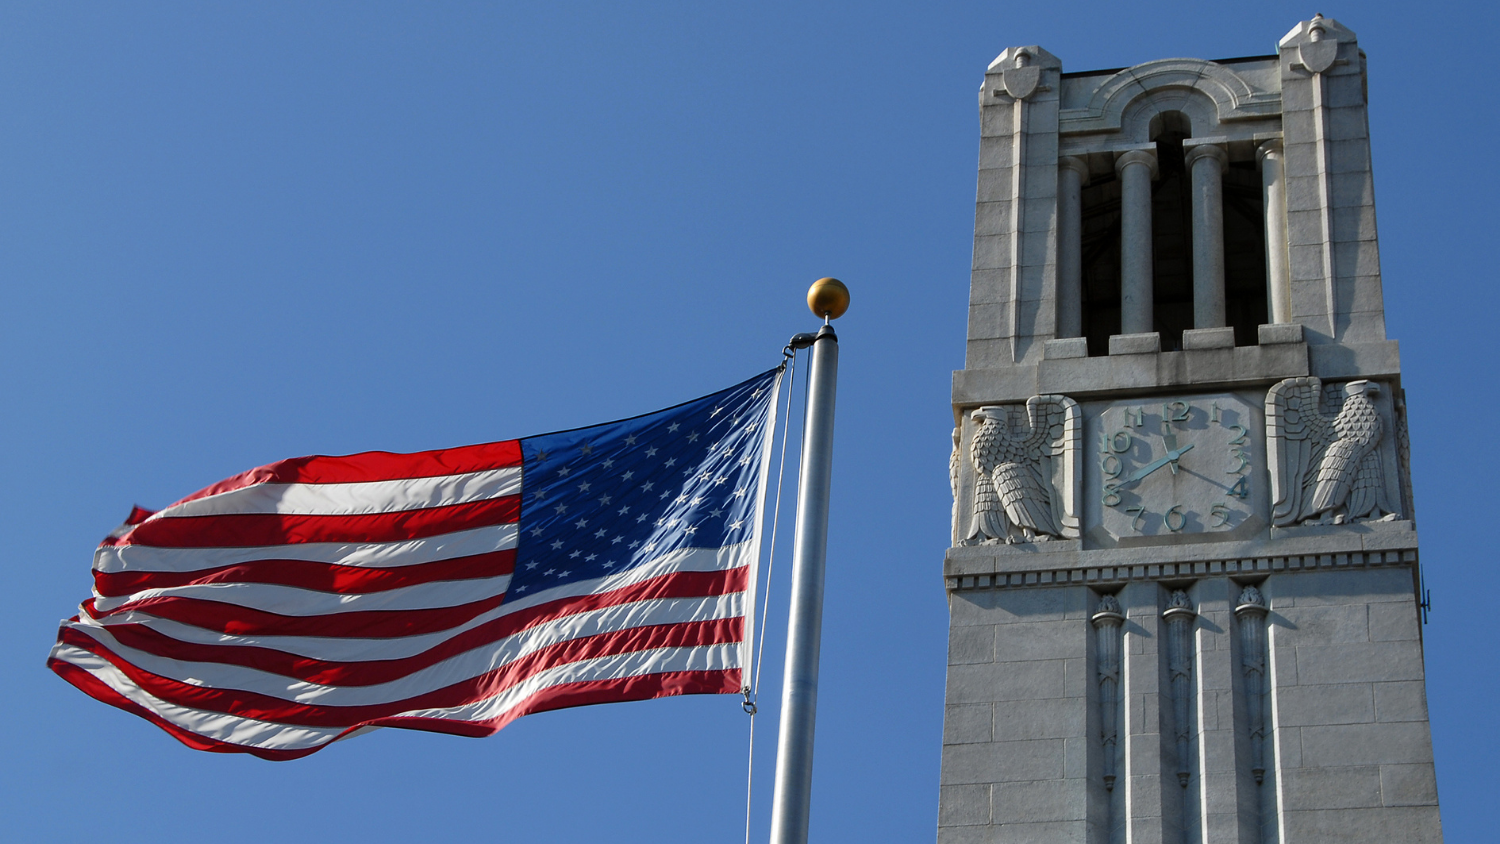 NC State belltower and the American Flag.